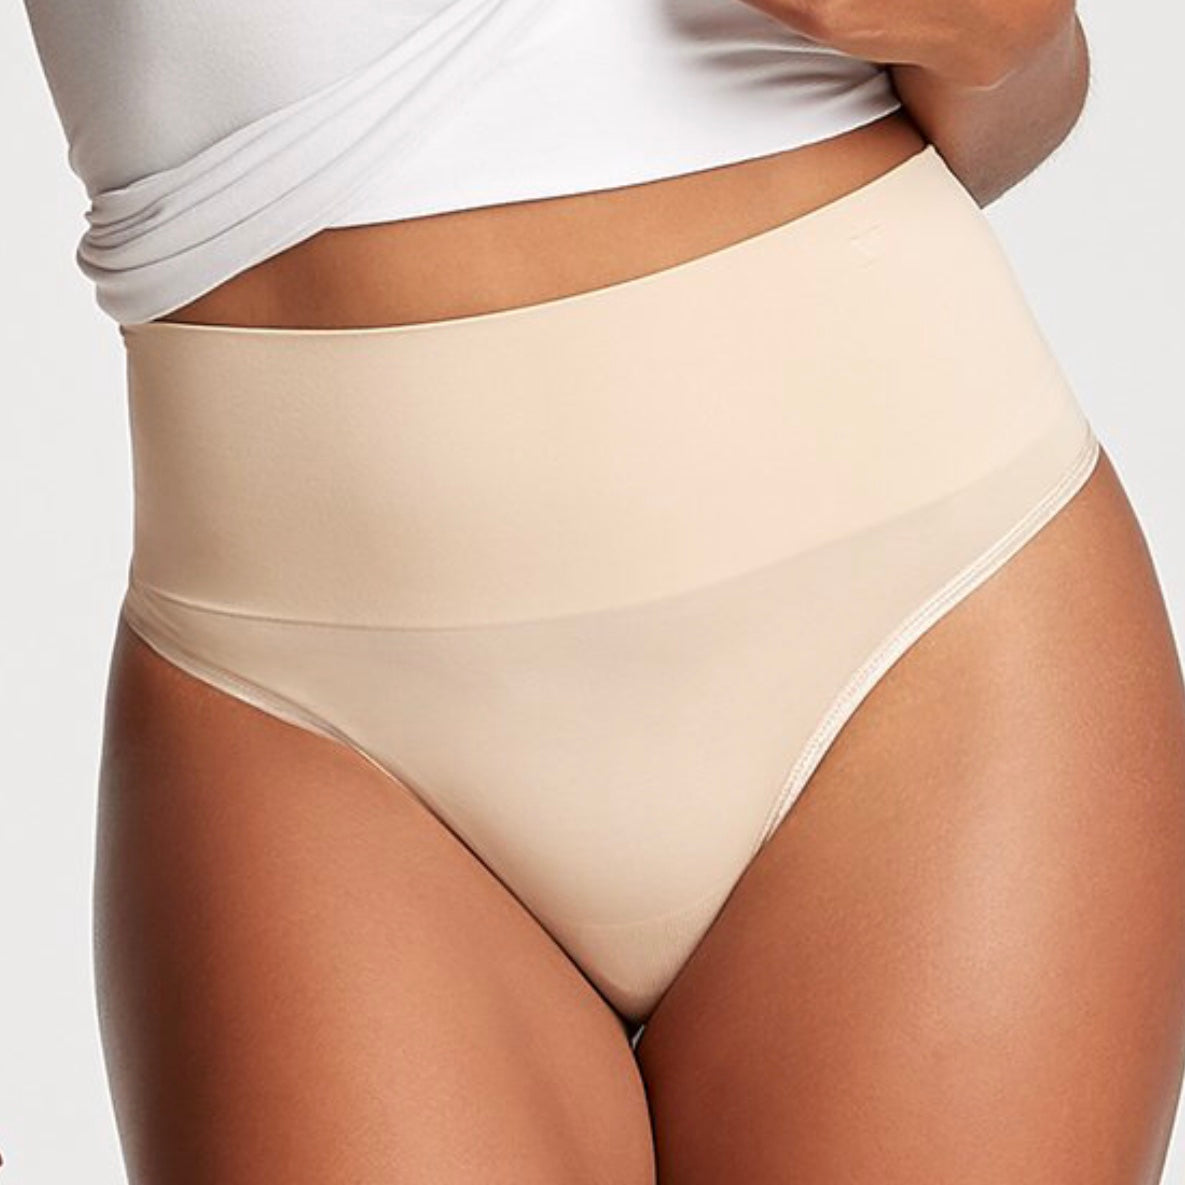 Yummie - Tummie Control Seamless Ultralight Thong - More Colors